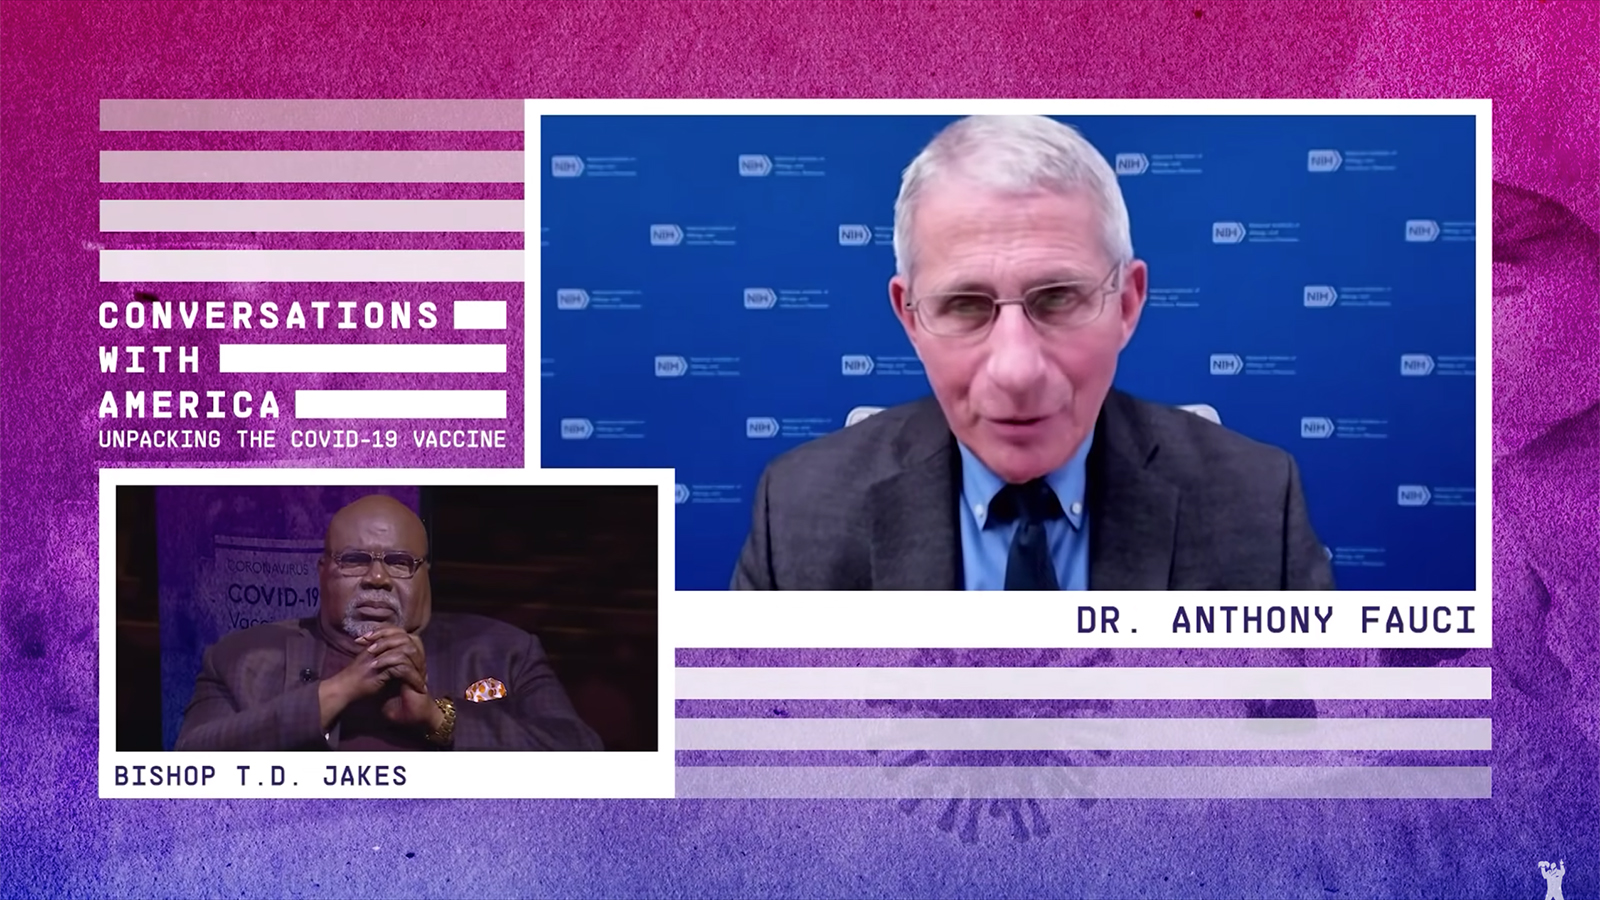 Dr. Anthony Fauci, right, speaks with Bishop T.D. Jakes, left, during “Conversations With America: Unpacking the COVID-19 Vaccine.” Video screengrab